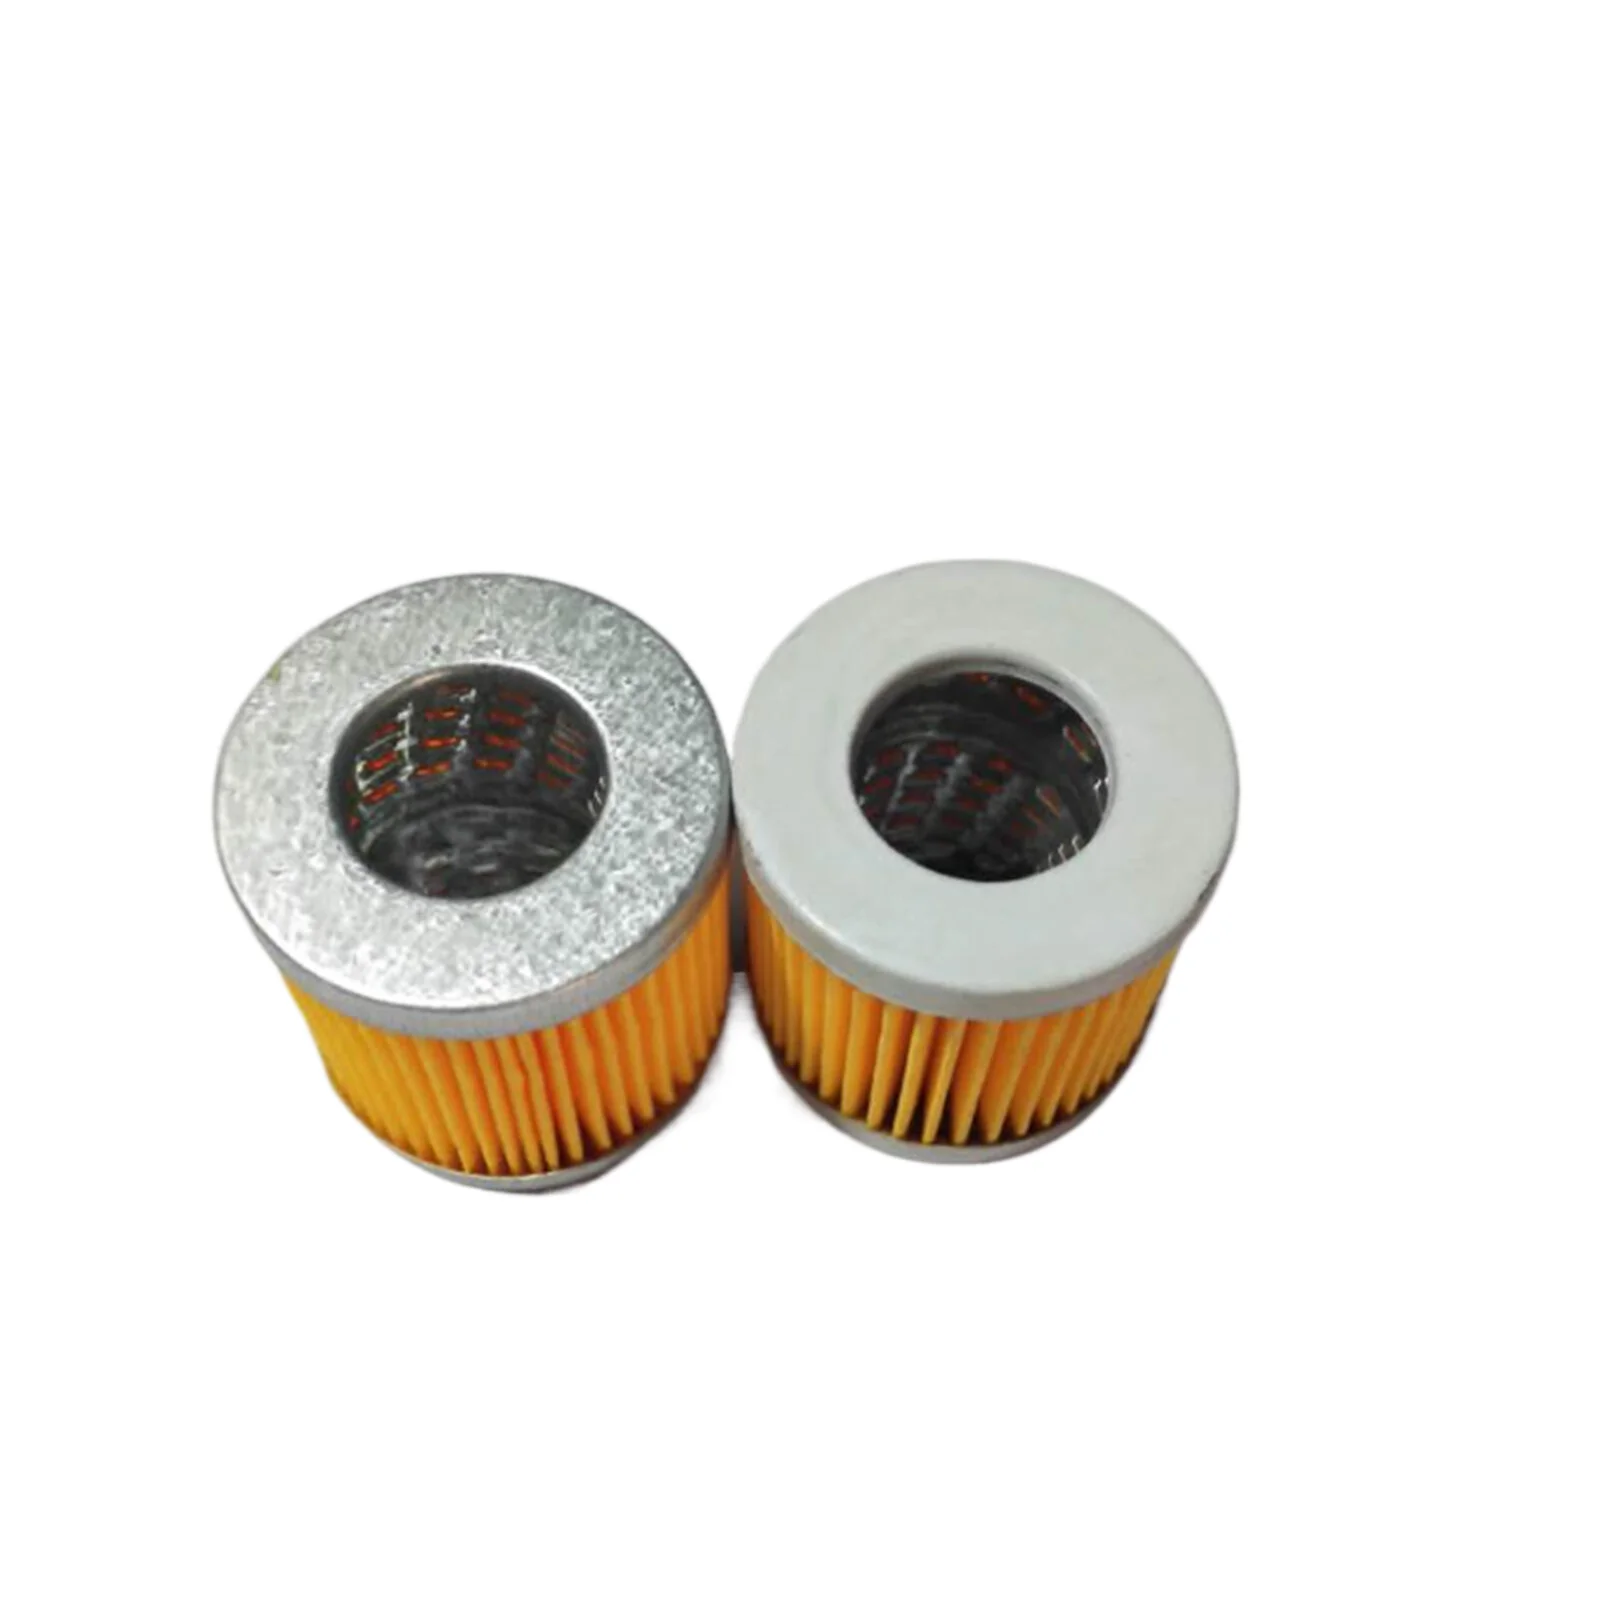 

2pcs C0506 for Shenniu 254 tractor parts, the fuel filter element C0506 for engine HB295T, part number: C0506 CX0506